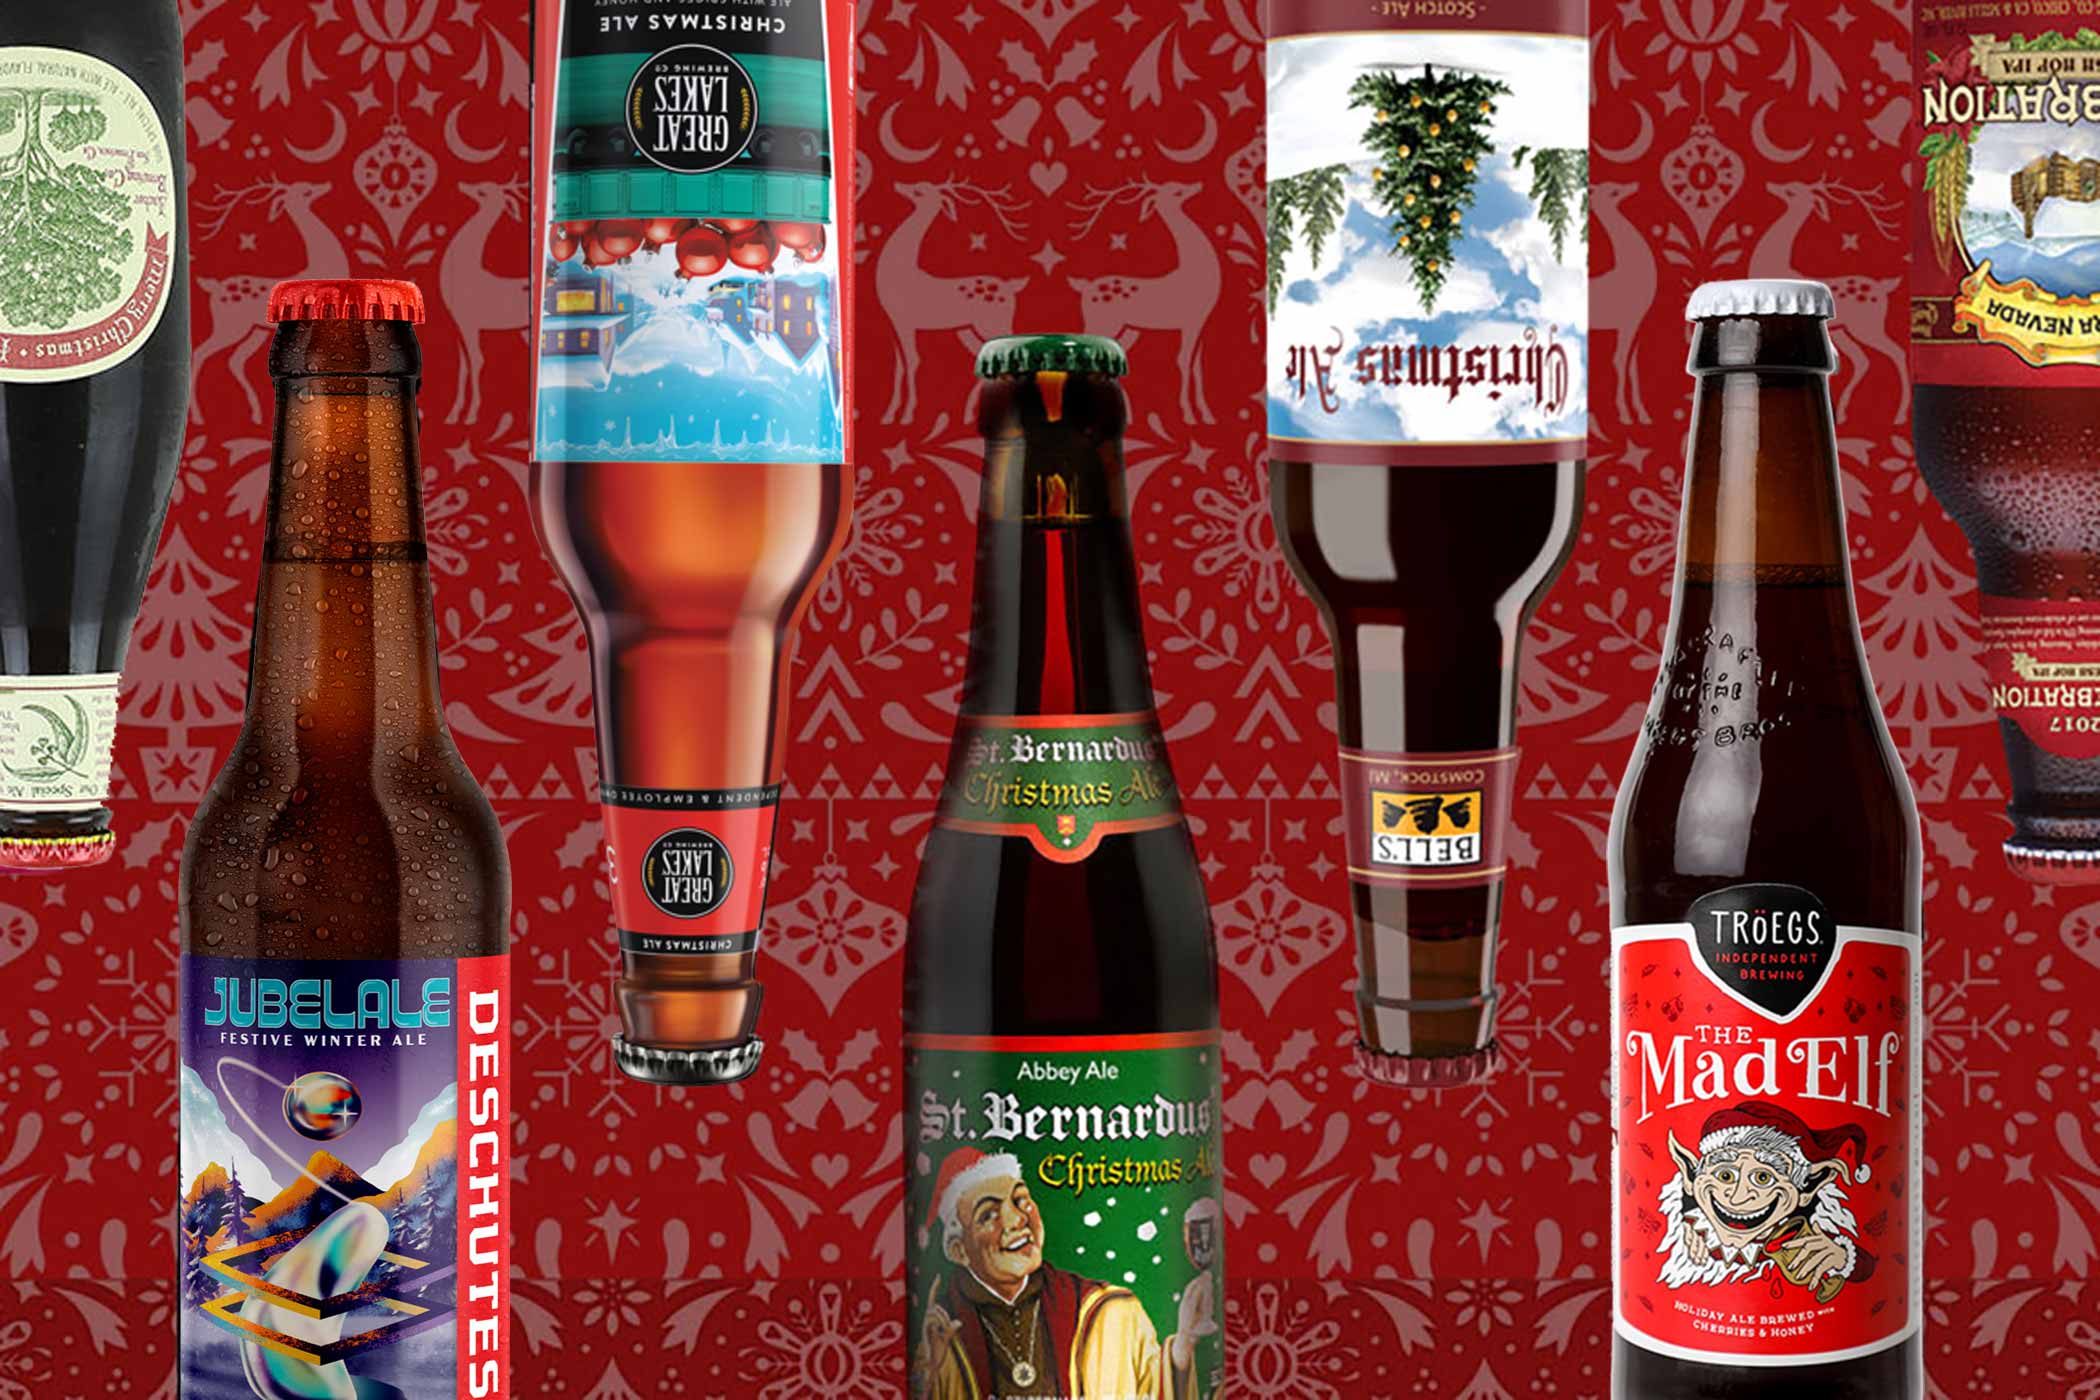 https://www.hopculture.com/wp-content/uploads/2022/11/holiday-christmas-beers-2022-LEAD.jpg